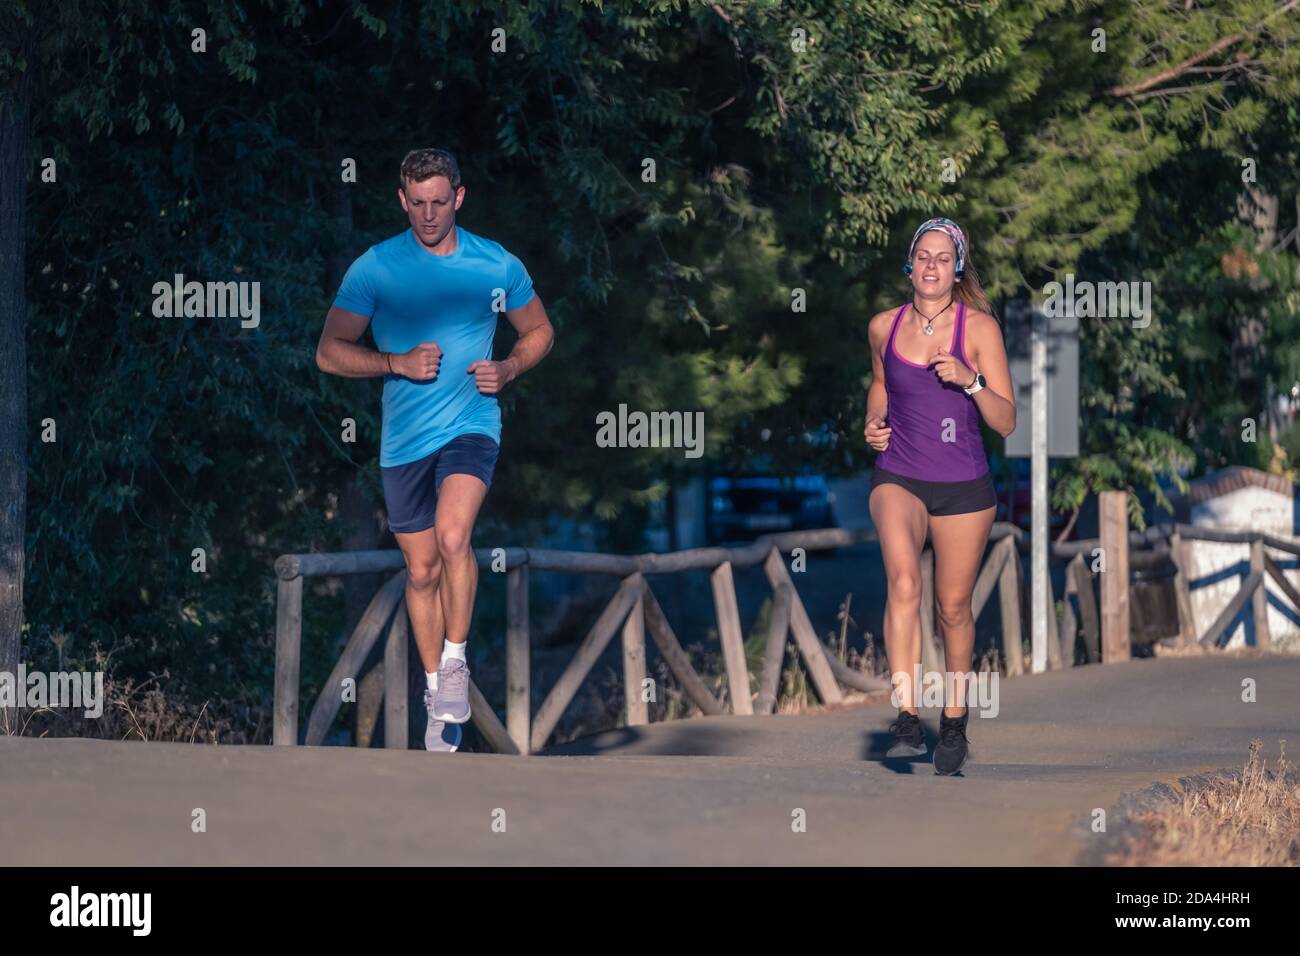 Young man in blue t-shirt and young woman in purple t-shirt jogging at park Stock Photo